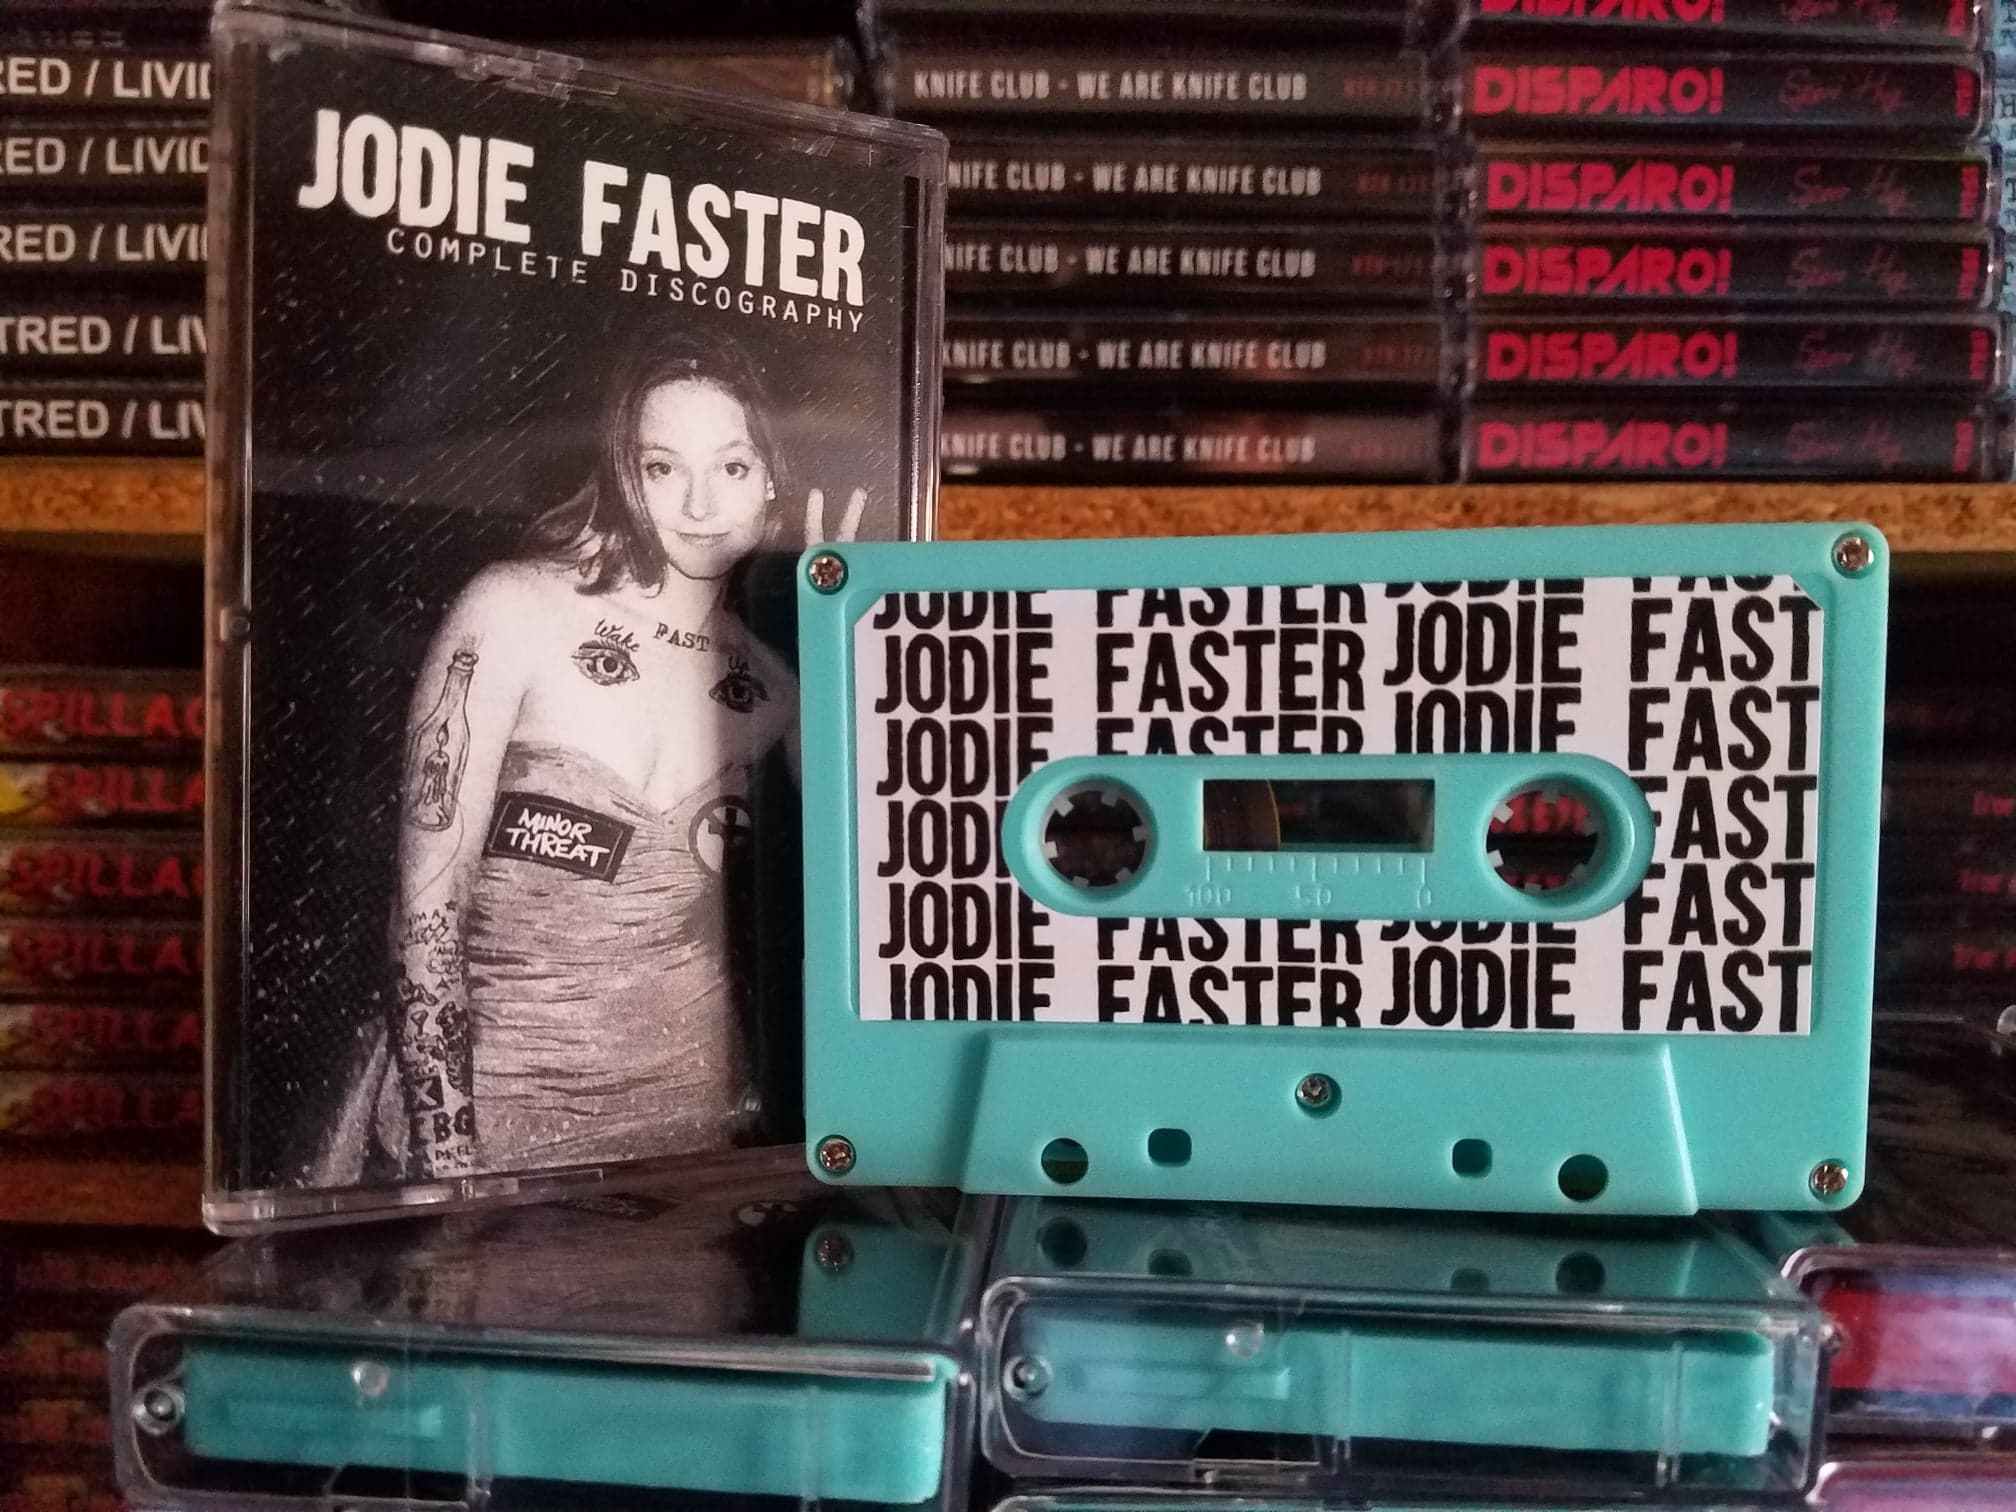 Jodie Faster - COMPLETE DISCOGRAPHY Cassette - Blue